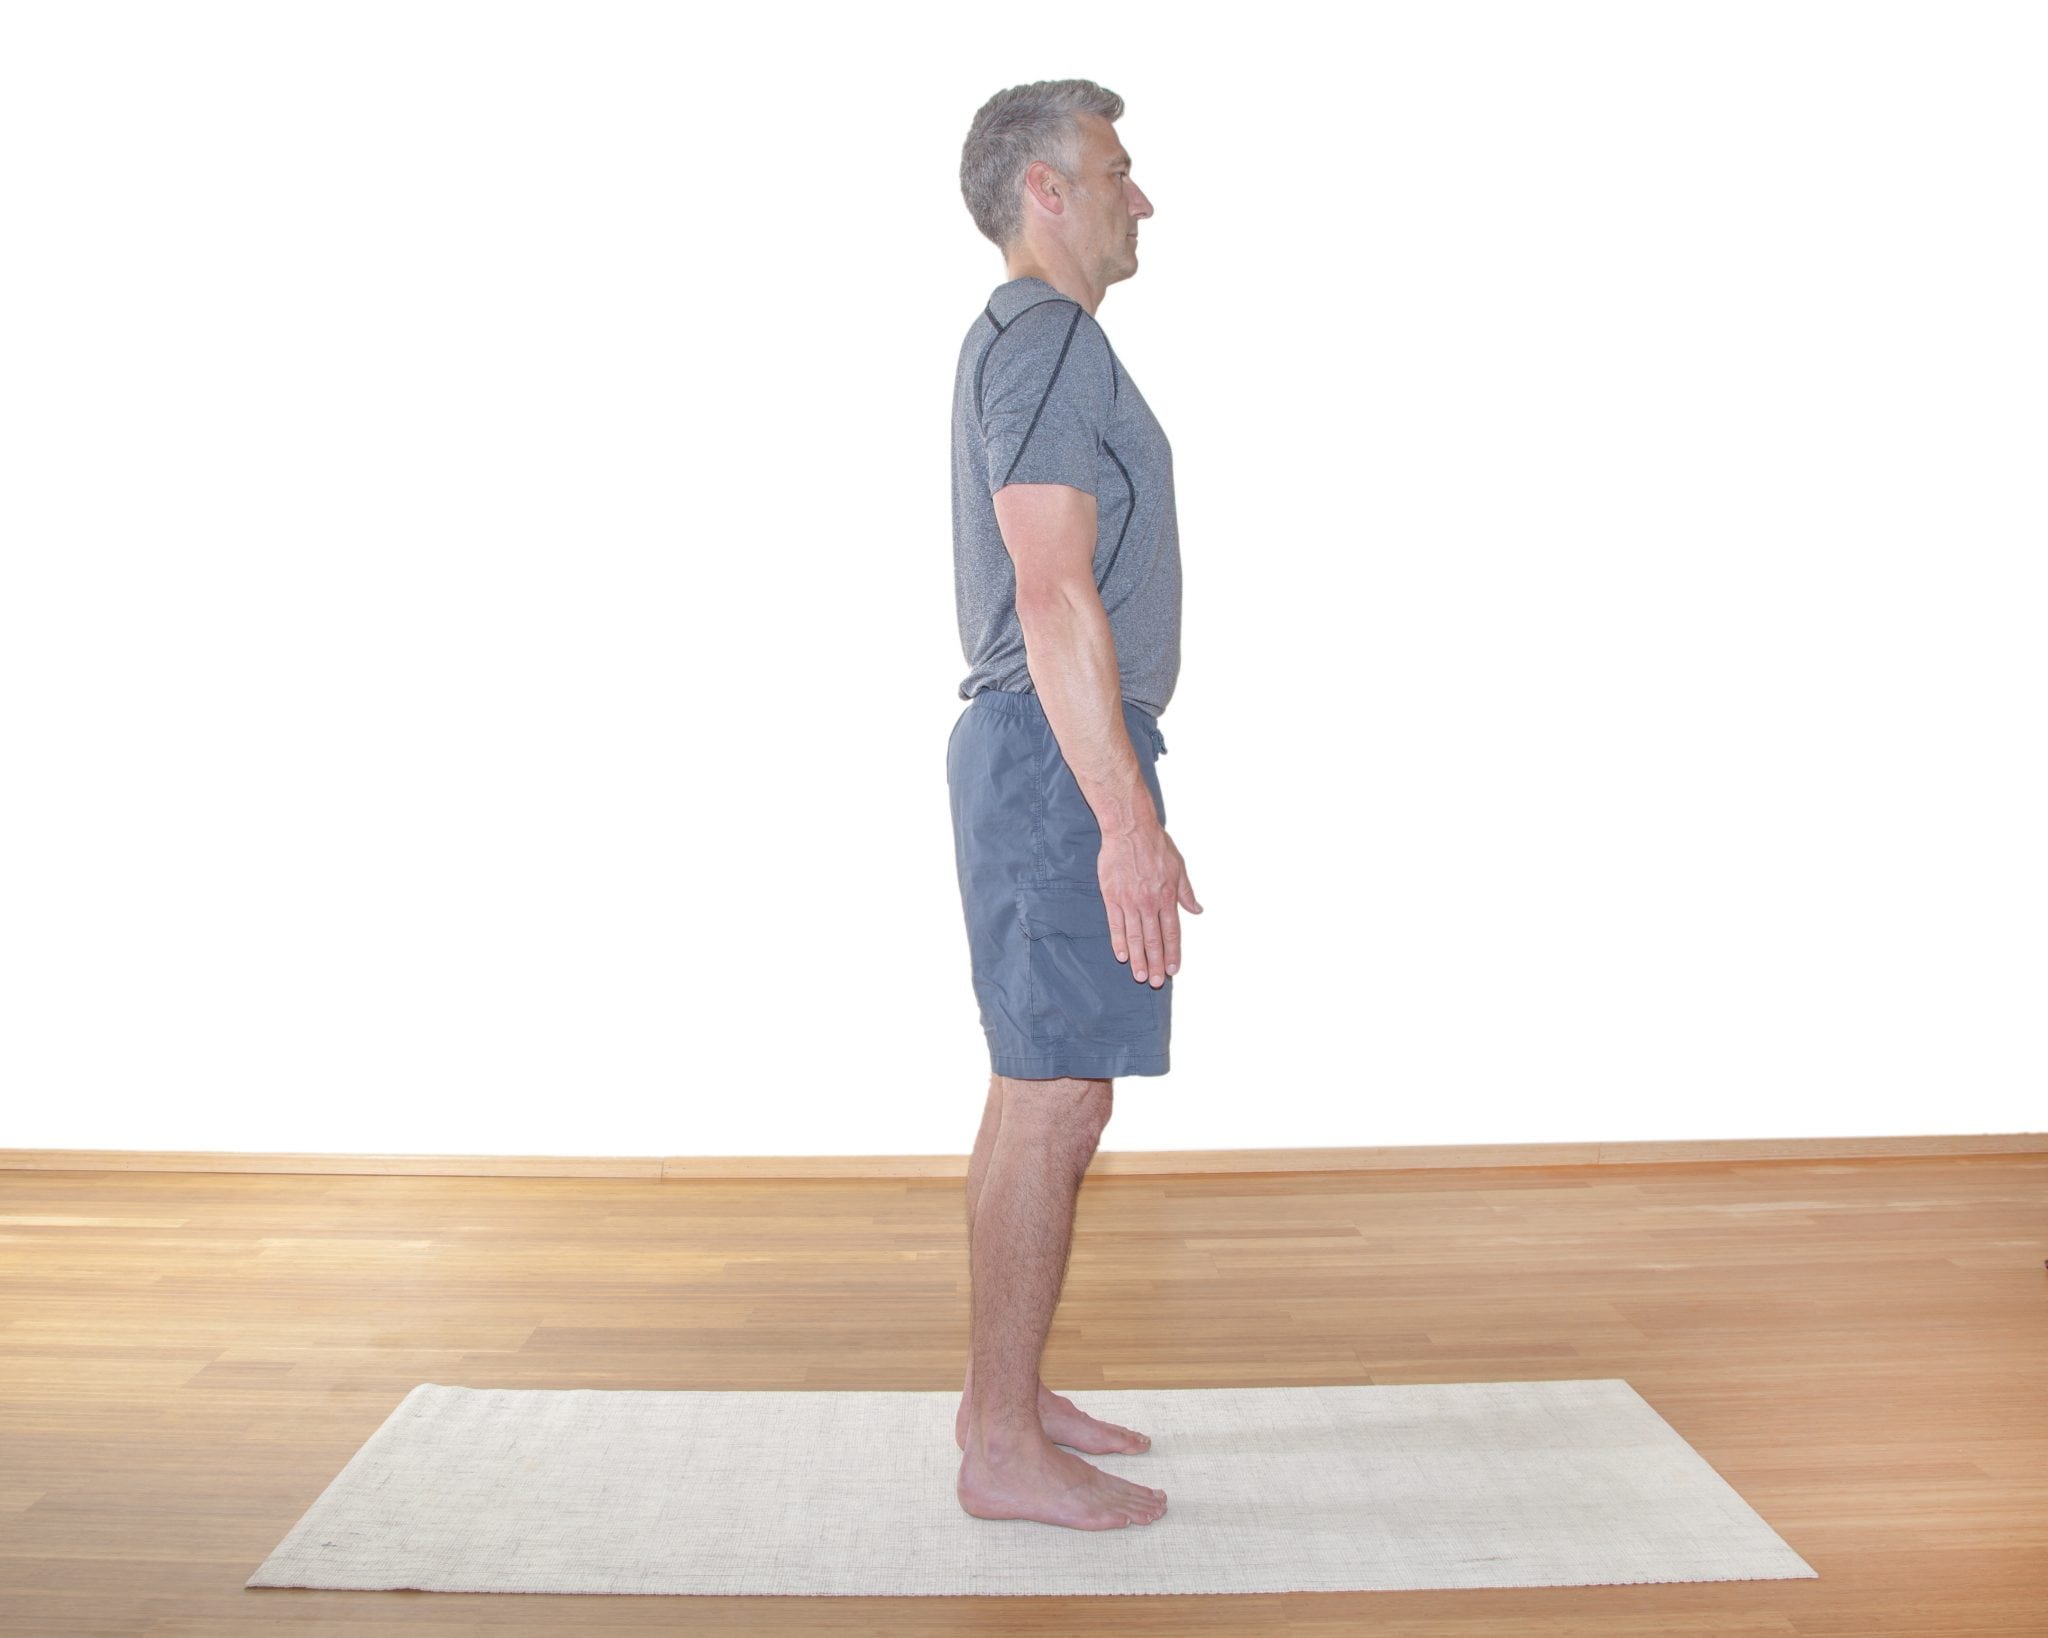 Yoga Teacher Central » Free Resources – Problem Cues: Spine & Pelvis /  Common Problems & Issues Related to Cueing for Spinal & Pelvic Alignment